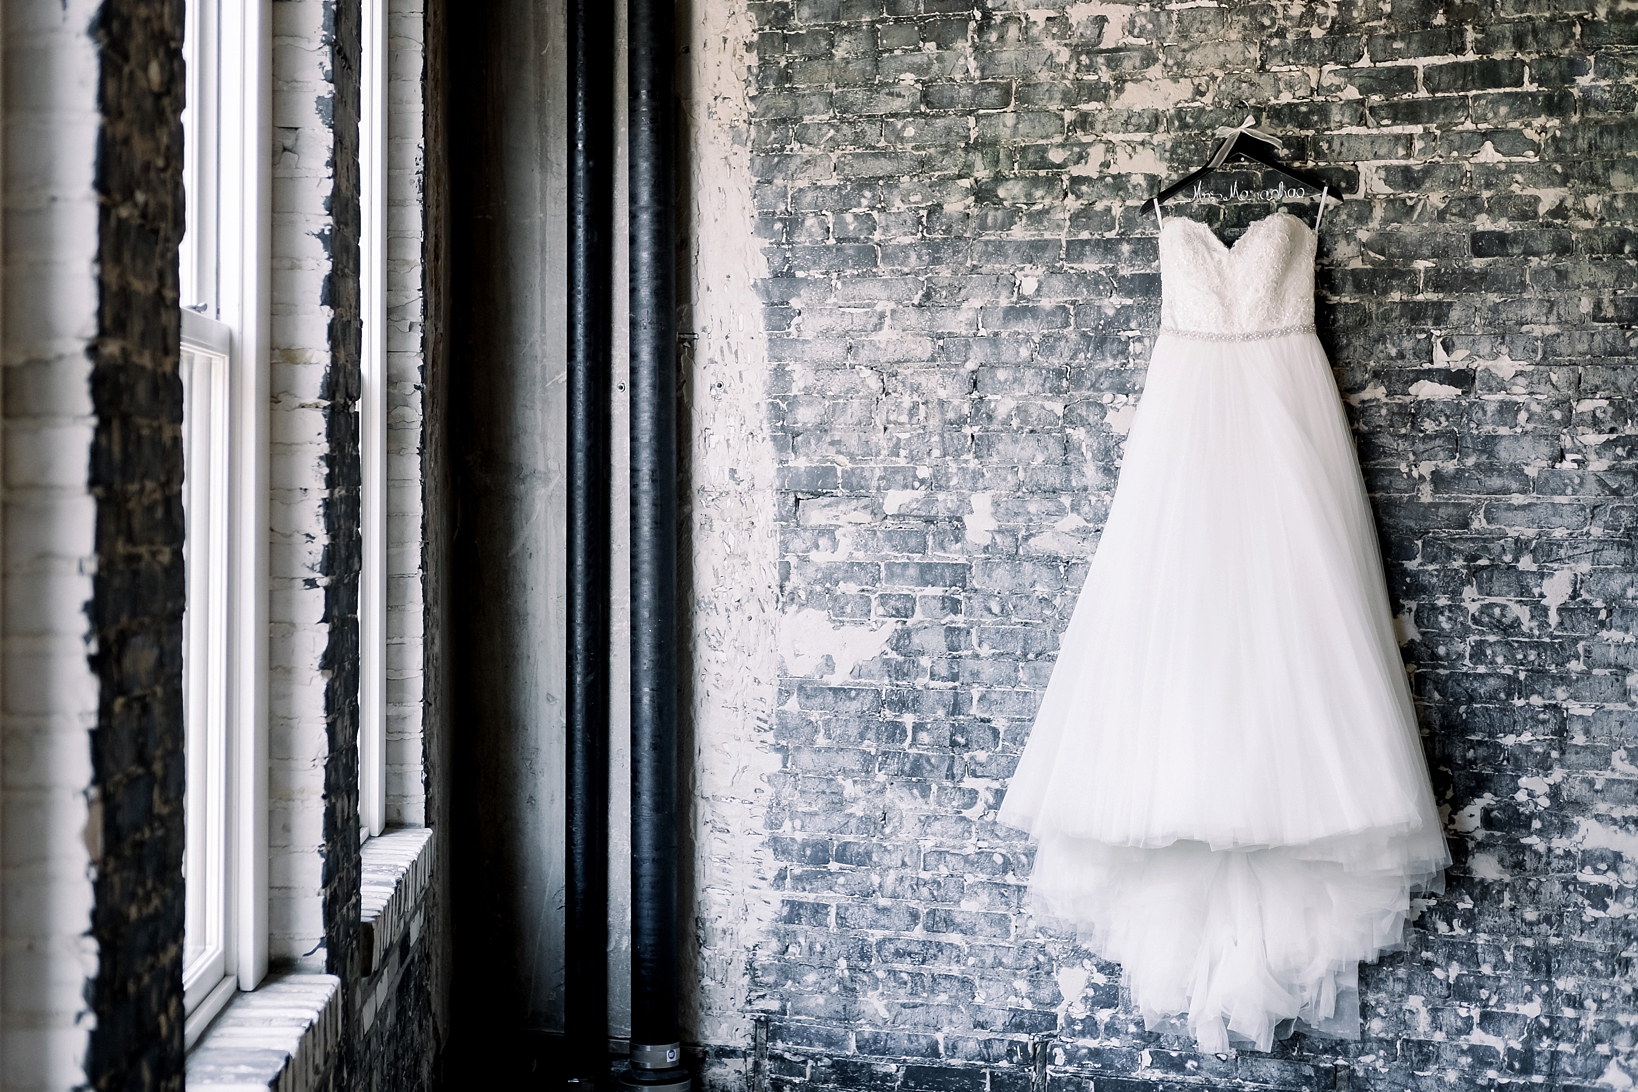 The Wedding Dress hanging on an aged brick wall in the holding room at the Oxford Exchange in Tampa, FL